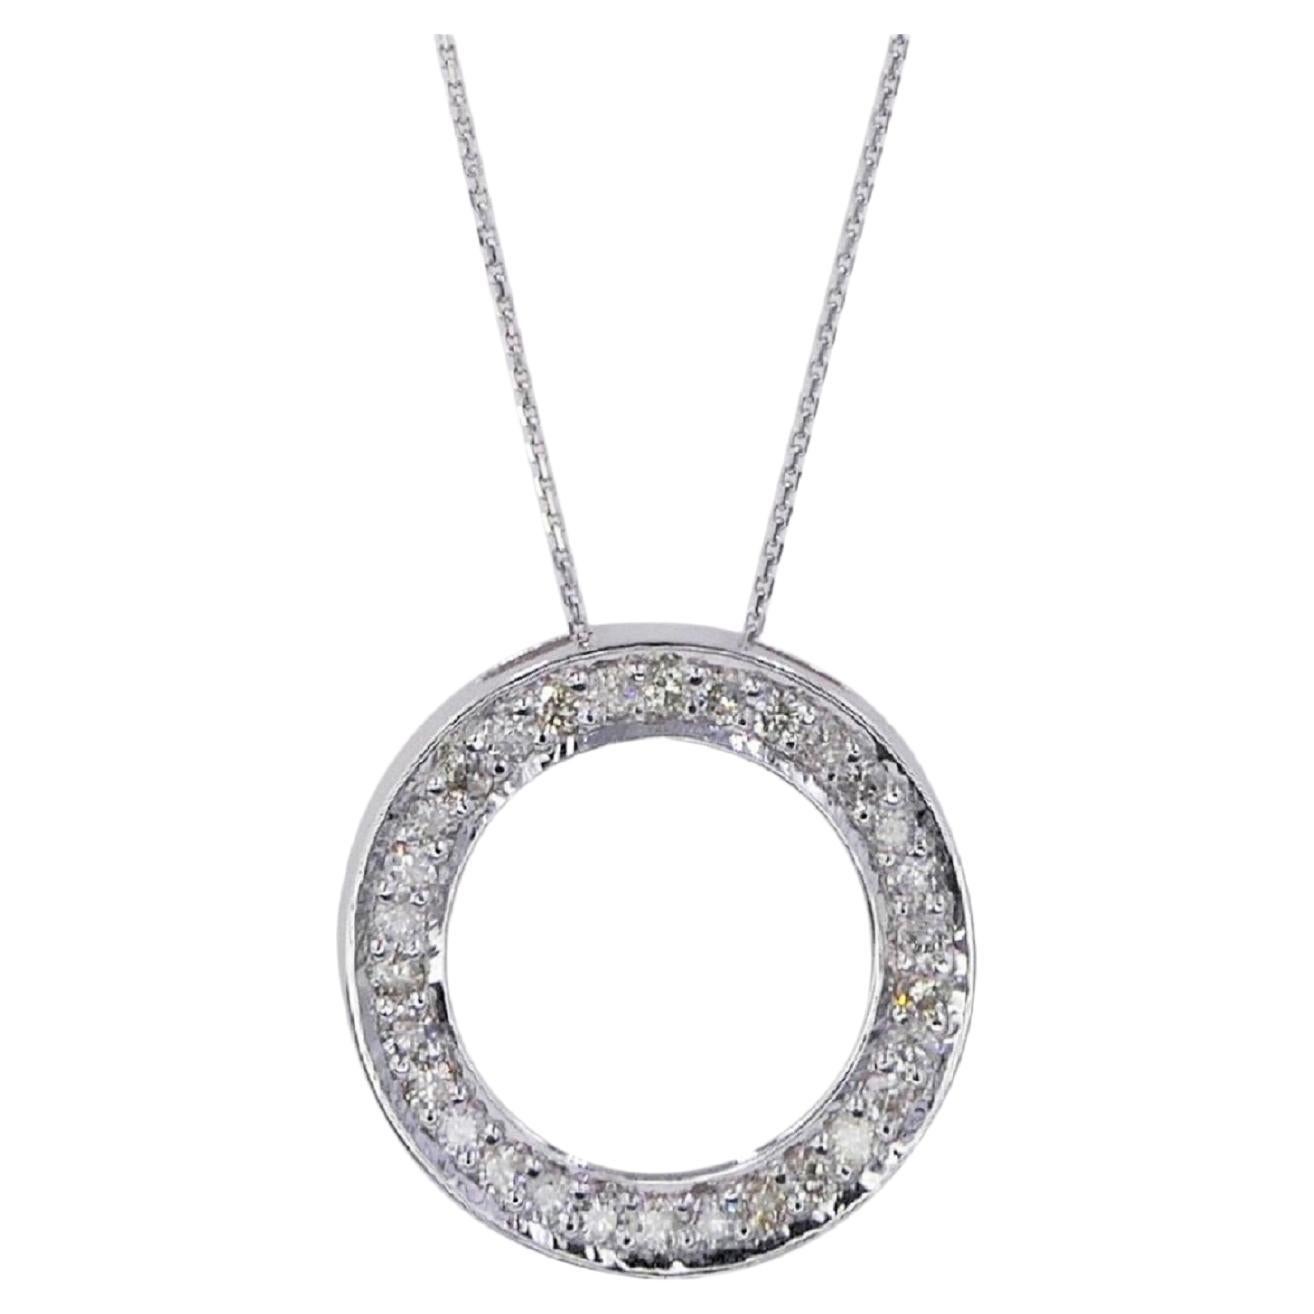 Diamond Pave Circle Round 14K White Gold Statement Casual Chain Necklace Pendant